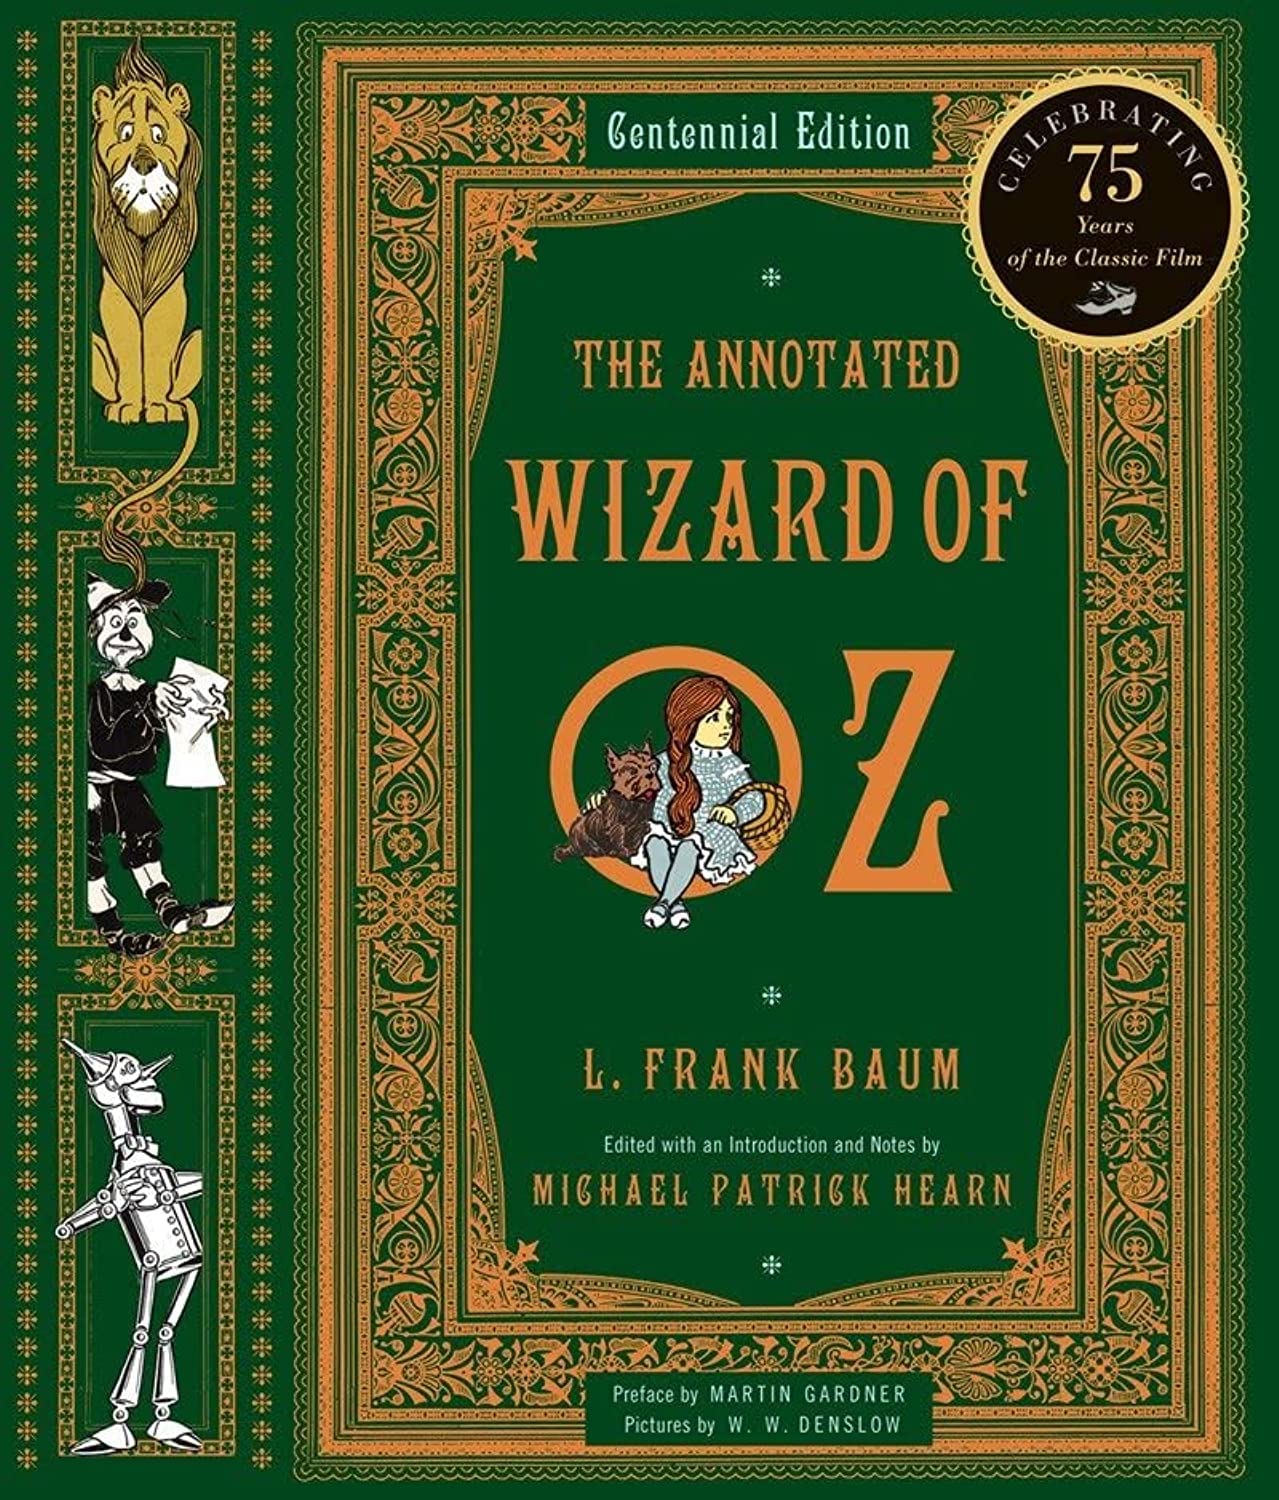 Cover of The Annotated Wizard of Oz with familiar Dorothy and friends in various ornamental sections